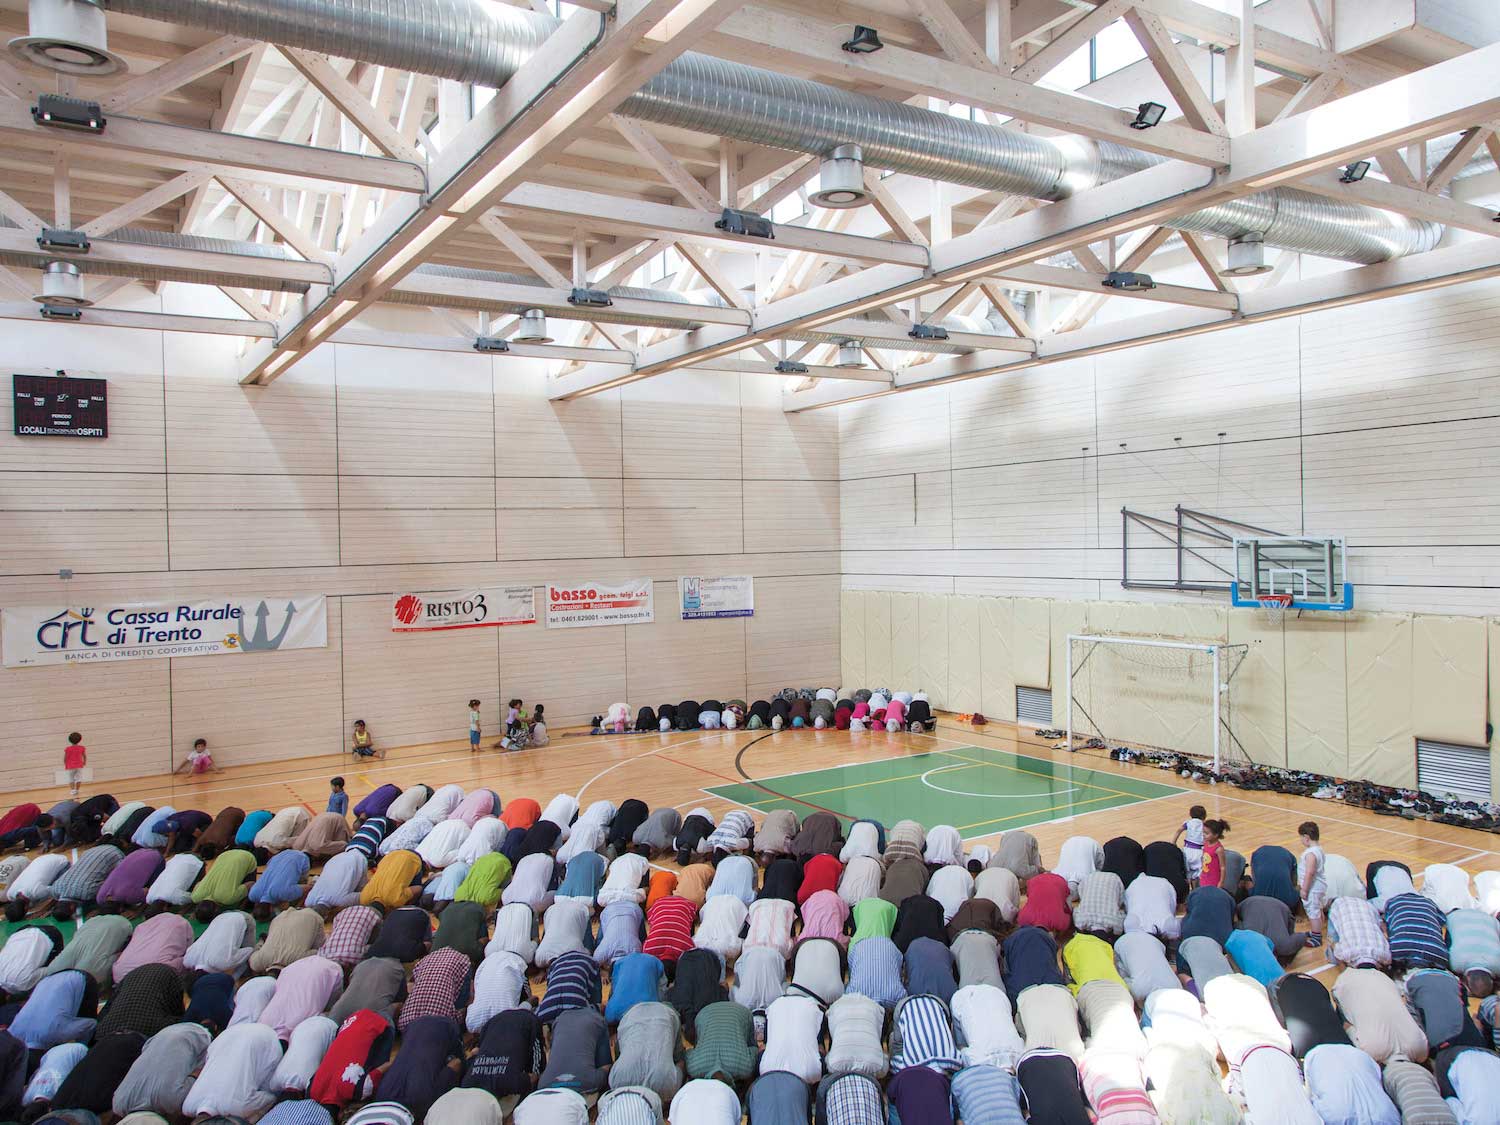 A stadium used as a makeshift place of worship for Muslims in the Province of Trento, Italy.